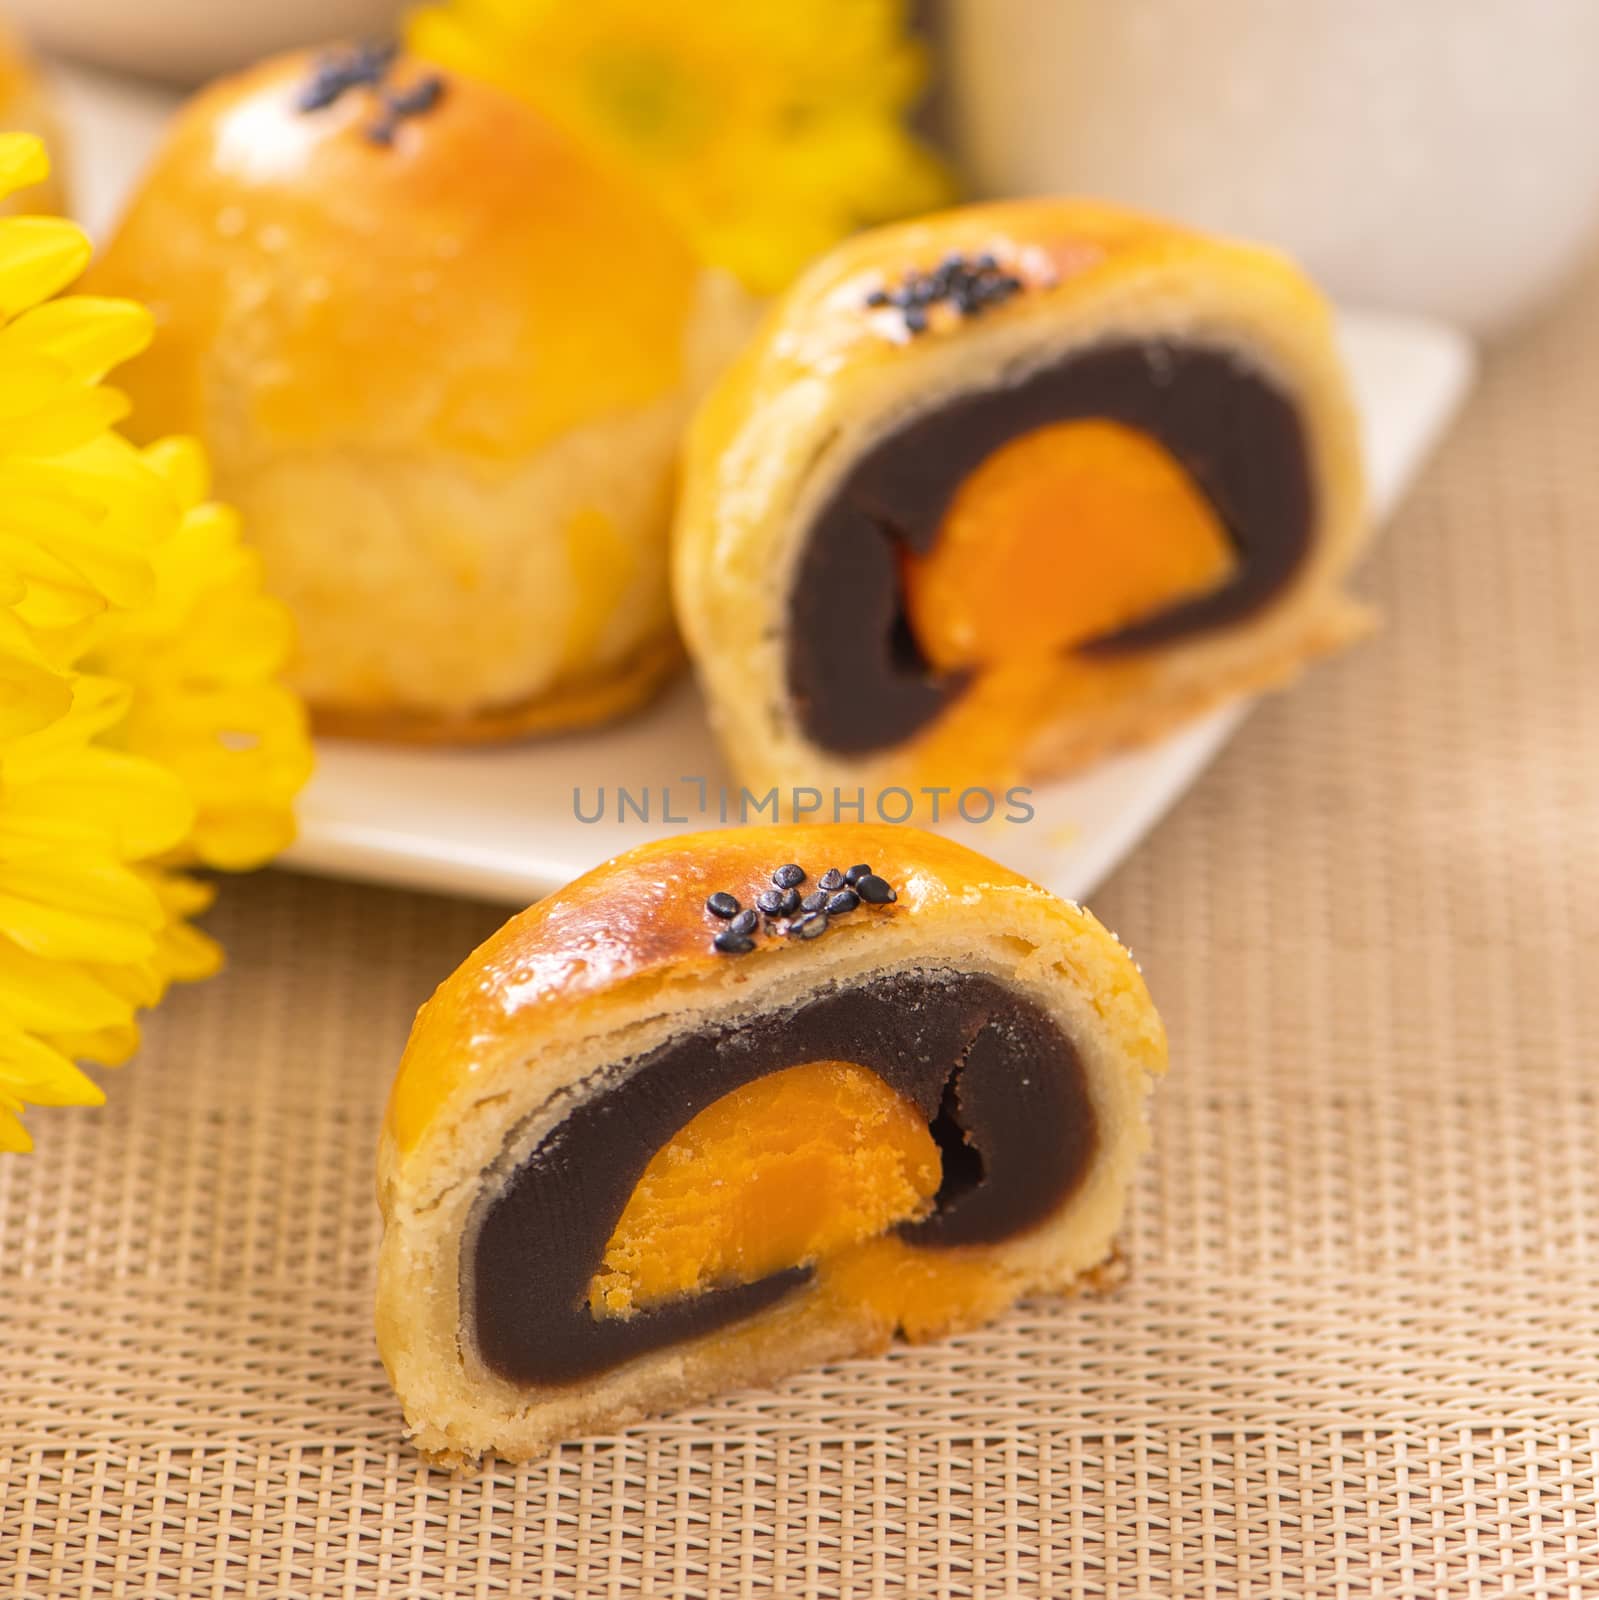 Tasty baked egg yolk pastry moon cake for Mid-Autumn Festival on bright wooden table background. Chinese festive food concept, close up, copy space.